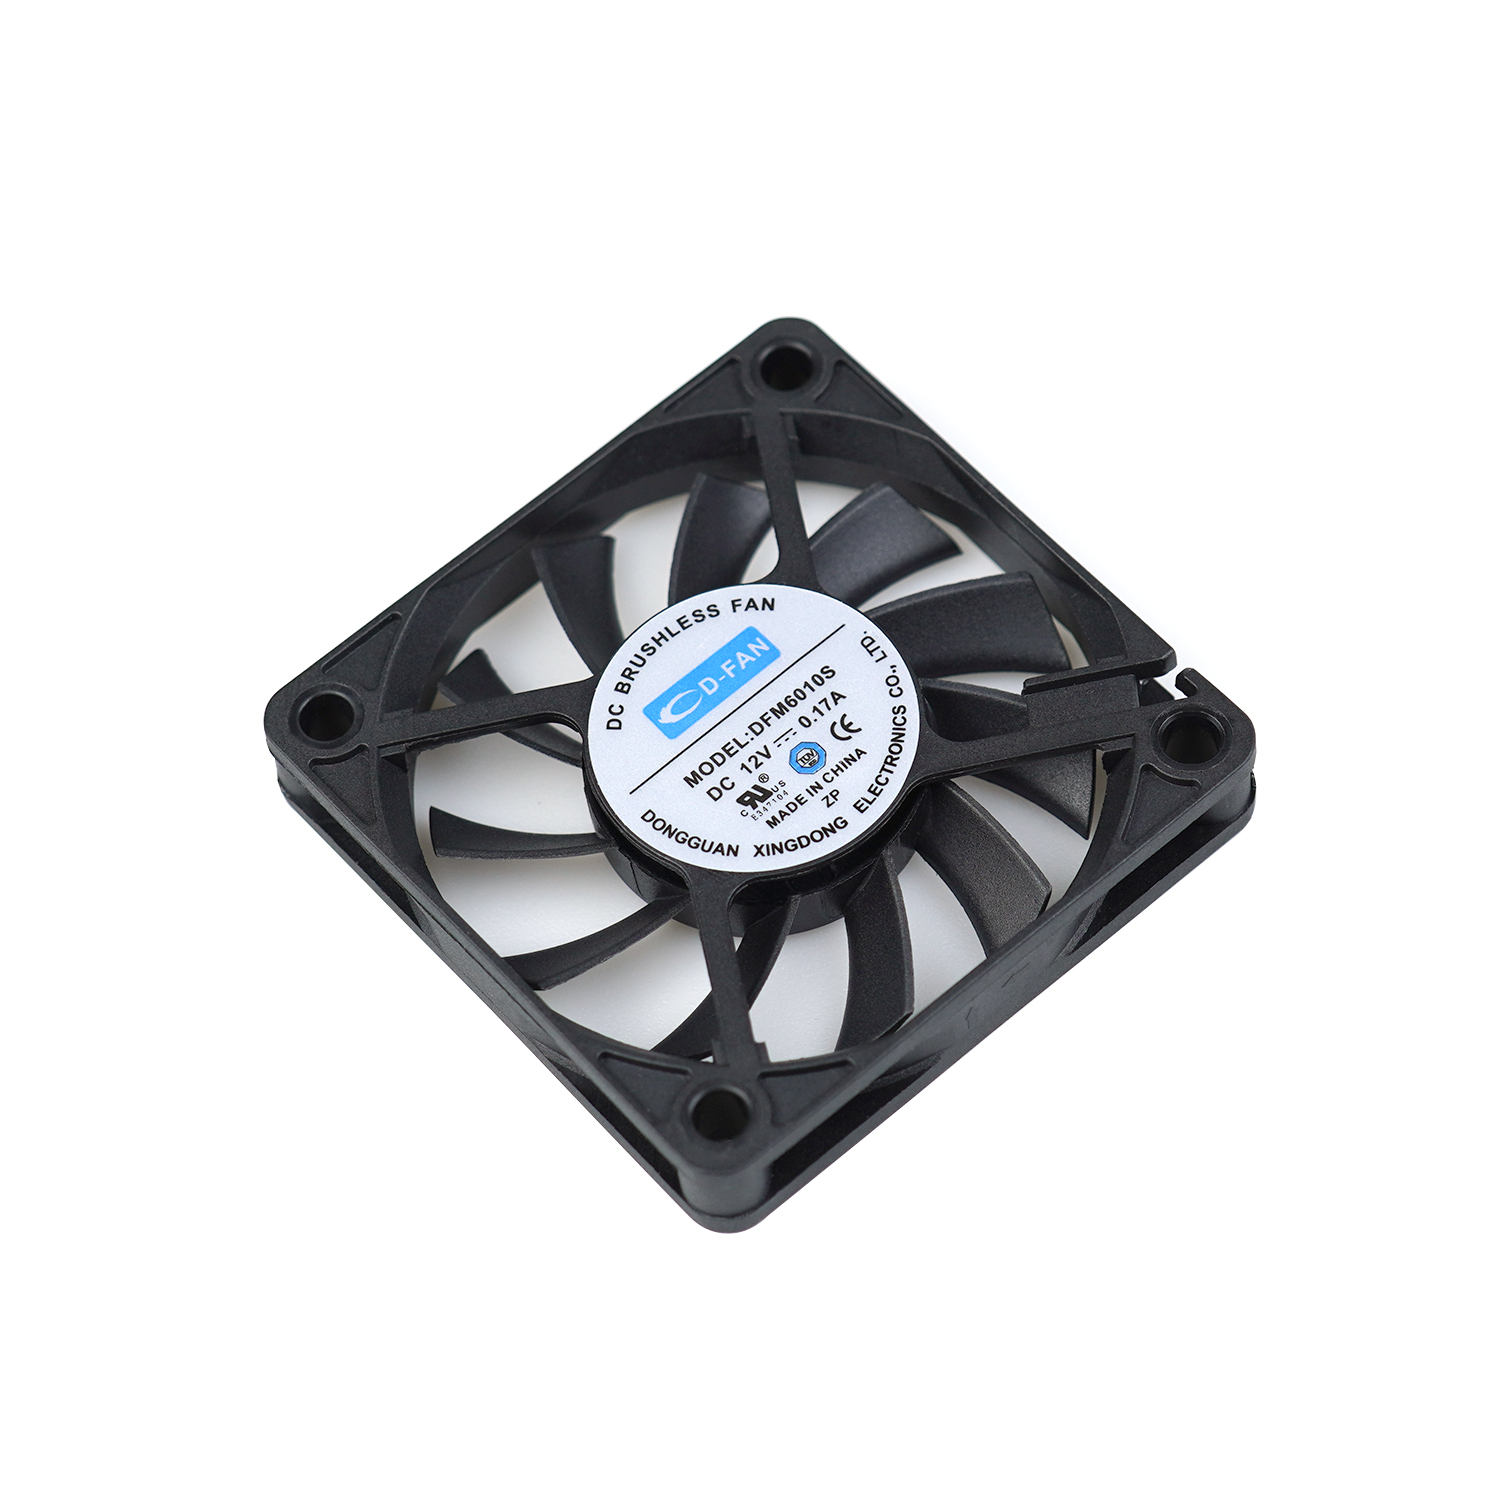 silent 5v 12v 60mm DC Axial Fan for projector